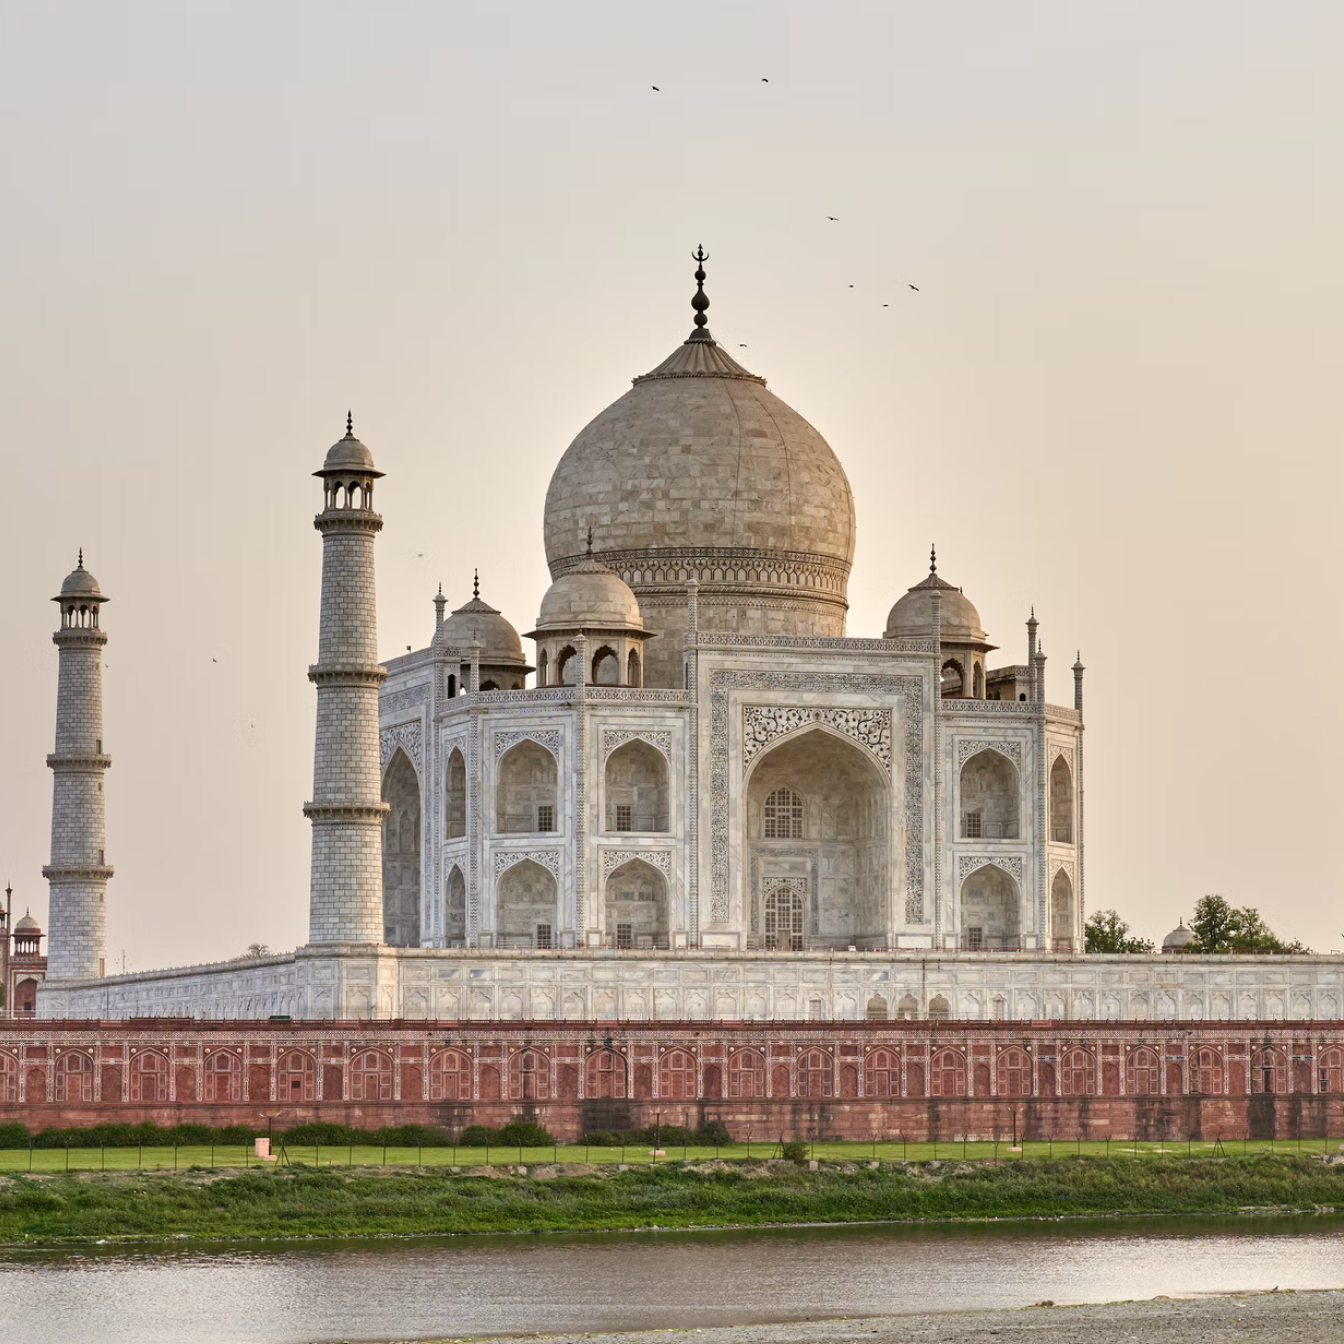  The Taj Mahal at sunset, an elegant white marble Indian monument, viewed from the side next to a grassy bank and river.